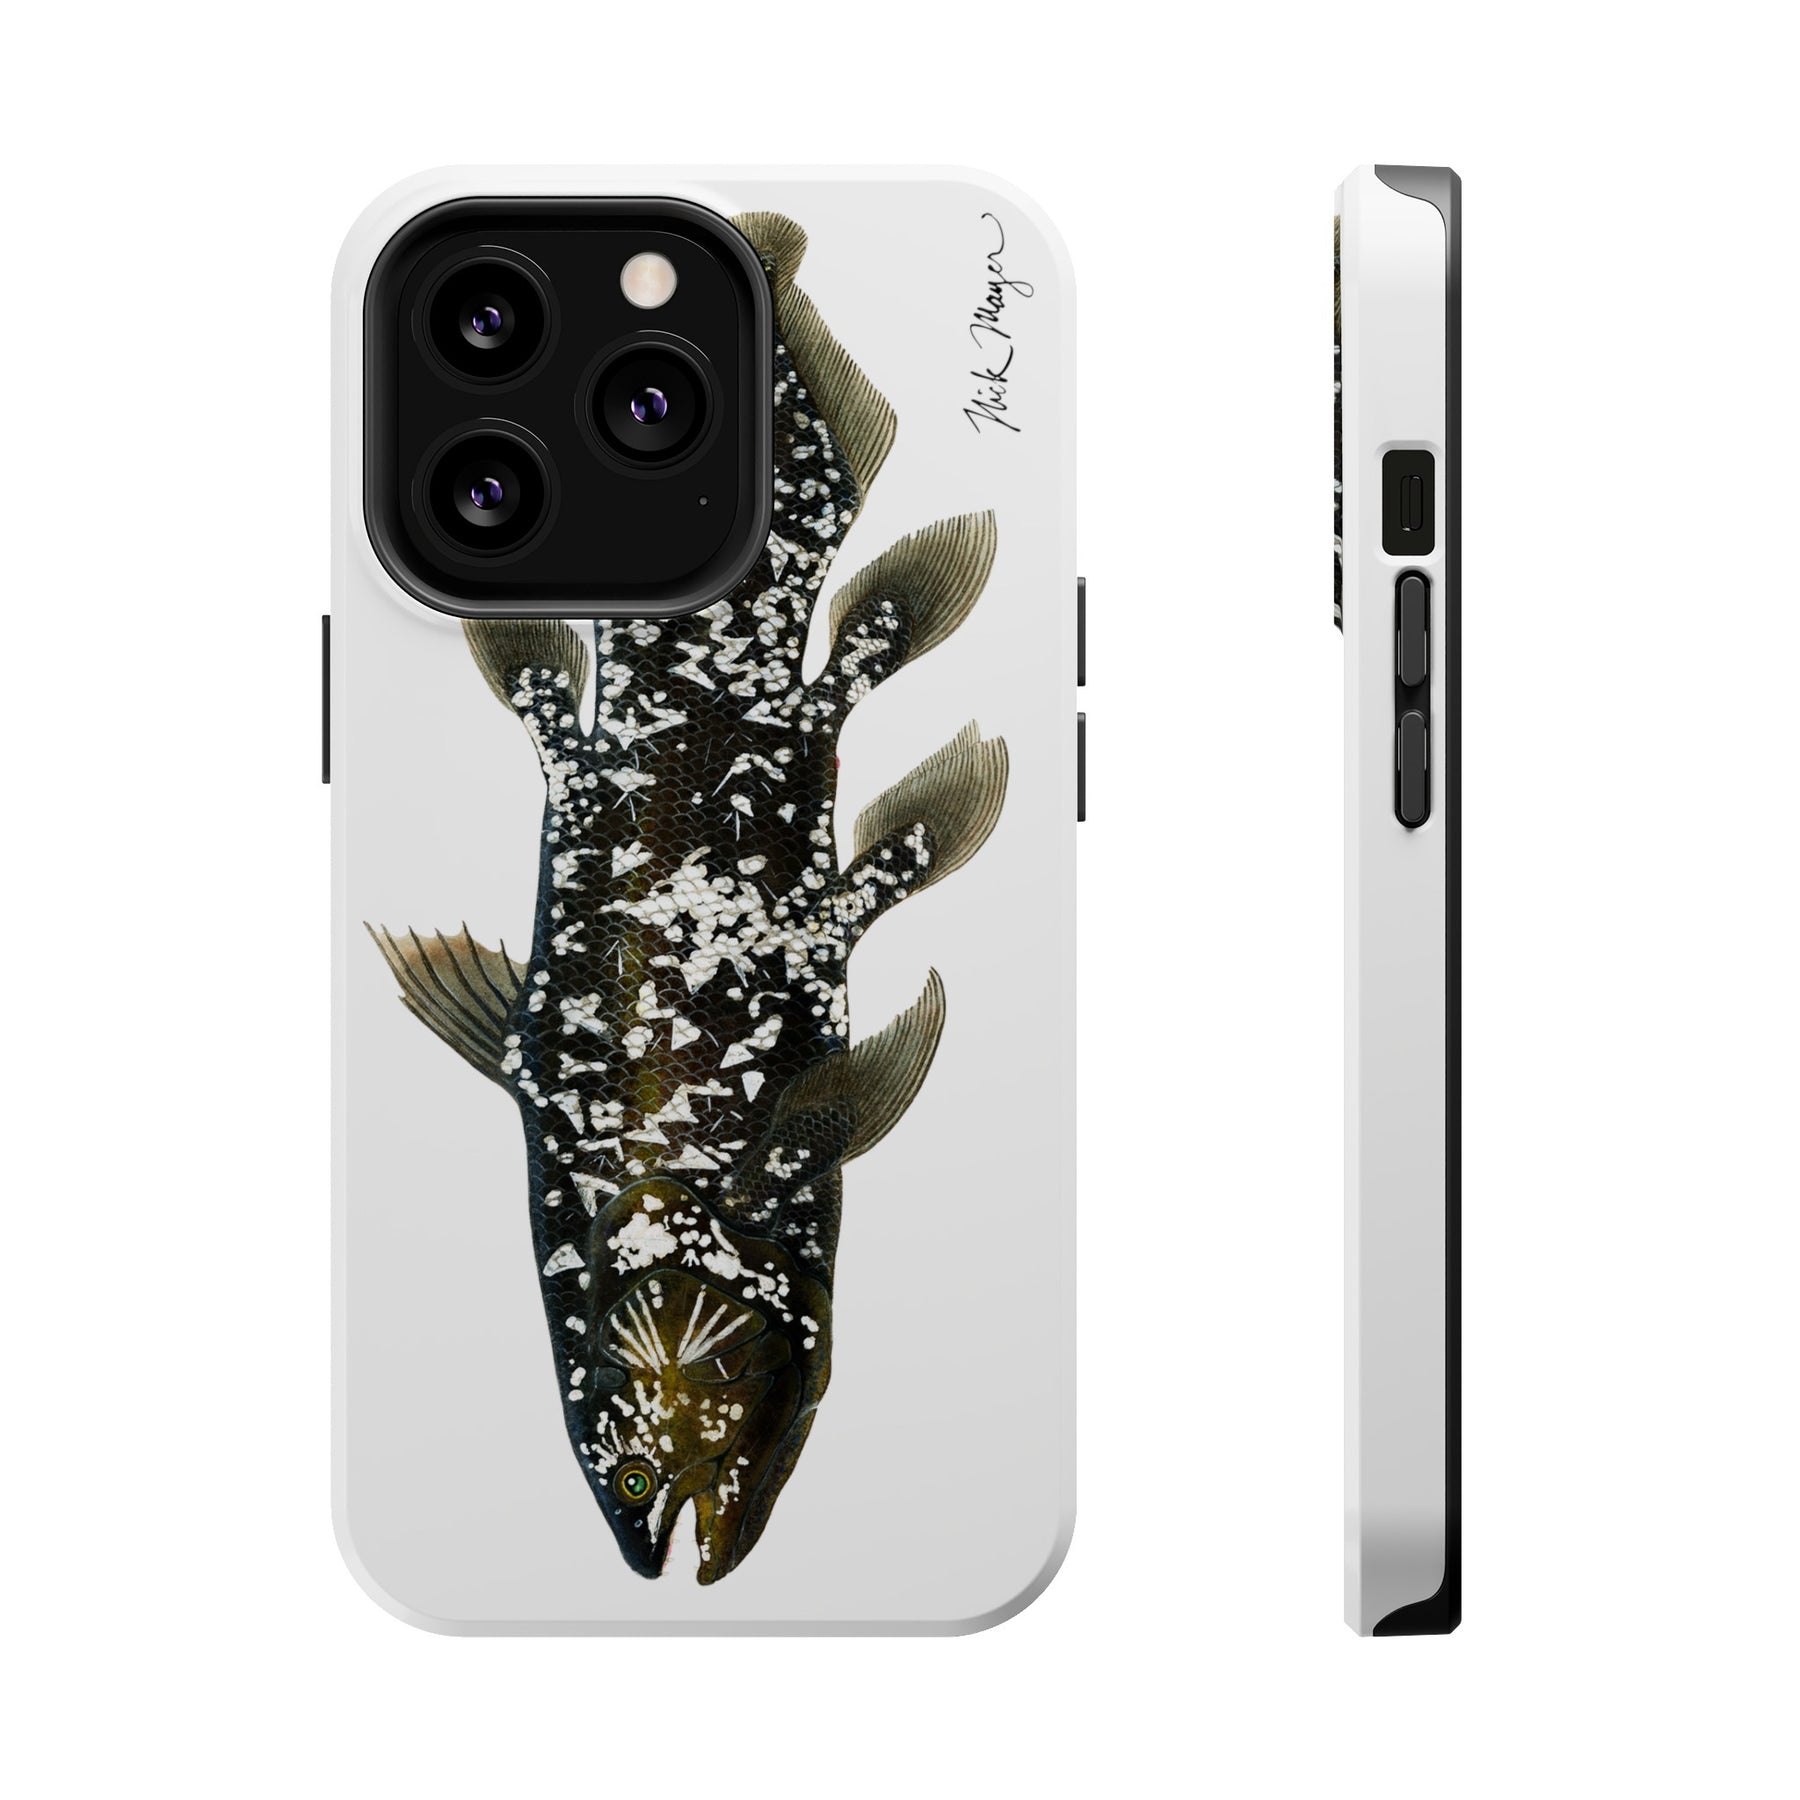 Coelacanth MagSafe Black iPhone Case